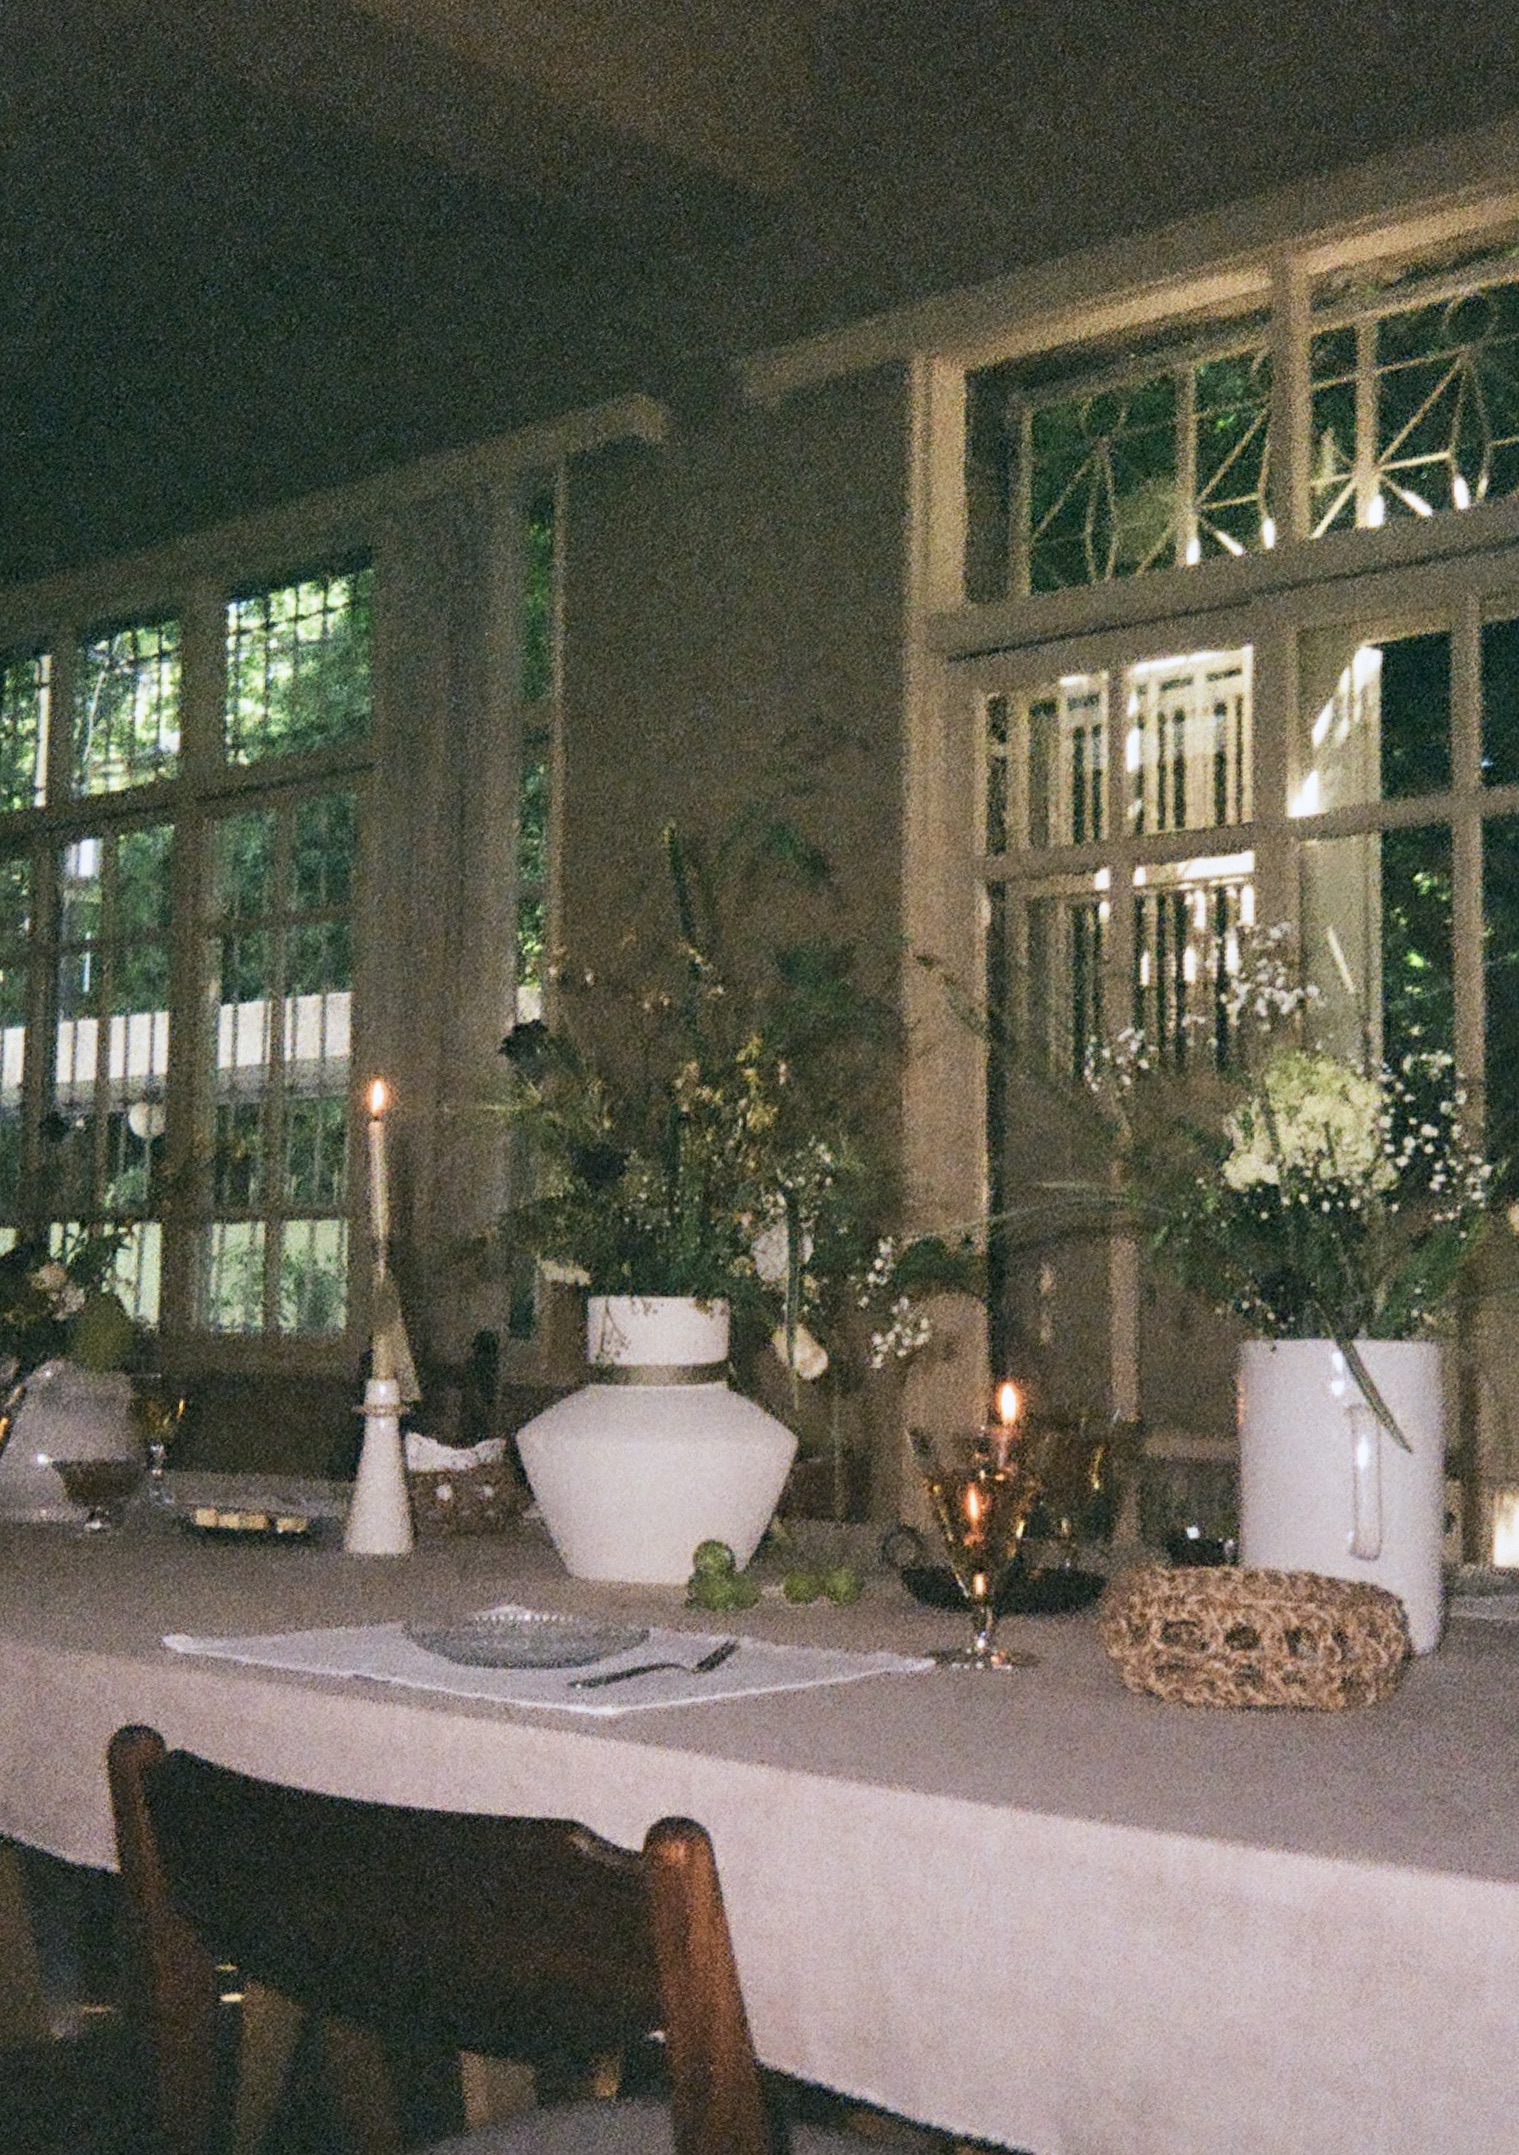 A dining table with decorations, vases, candles.